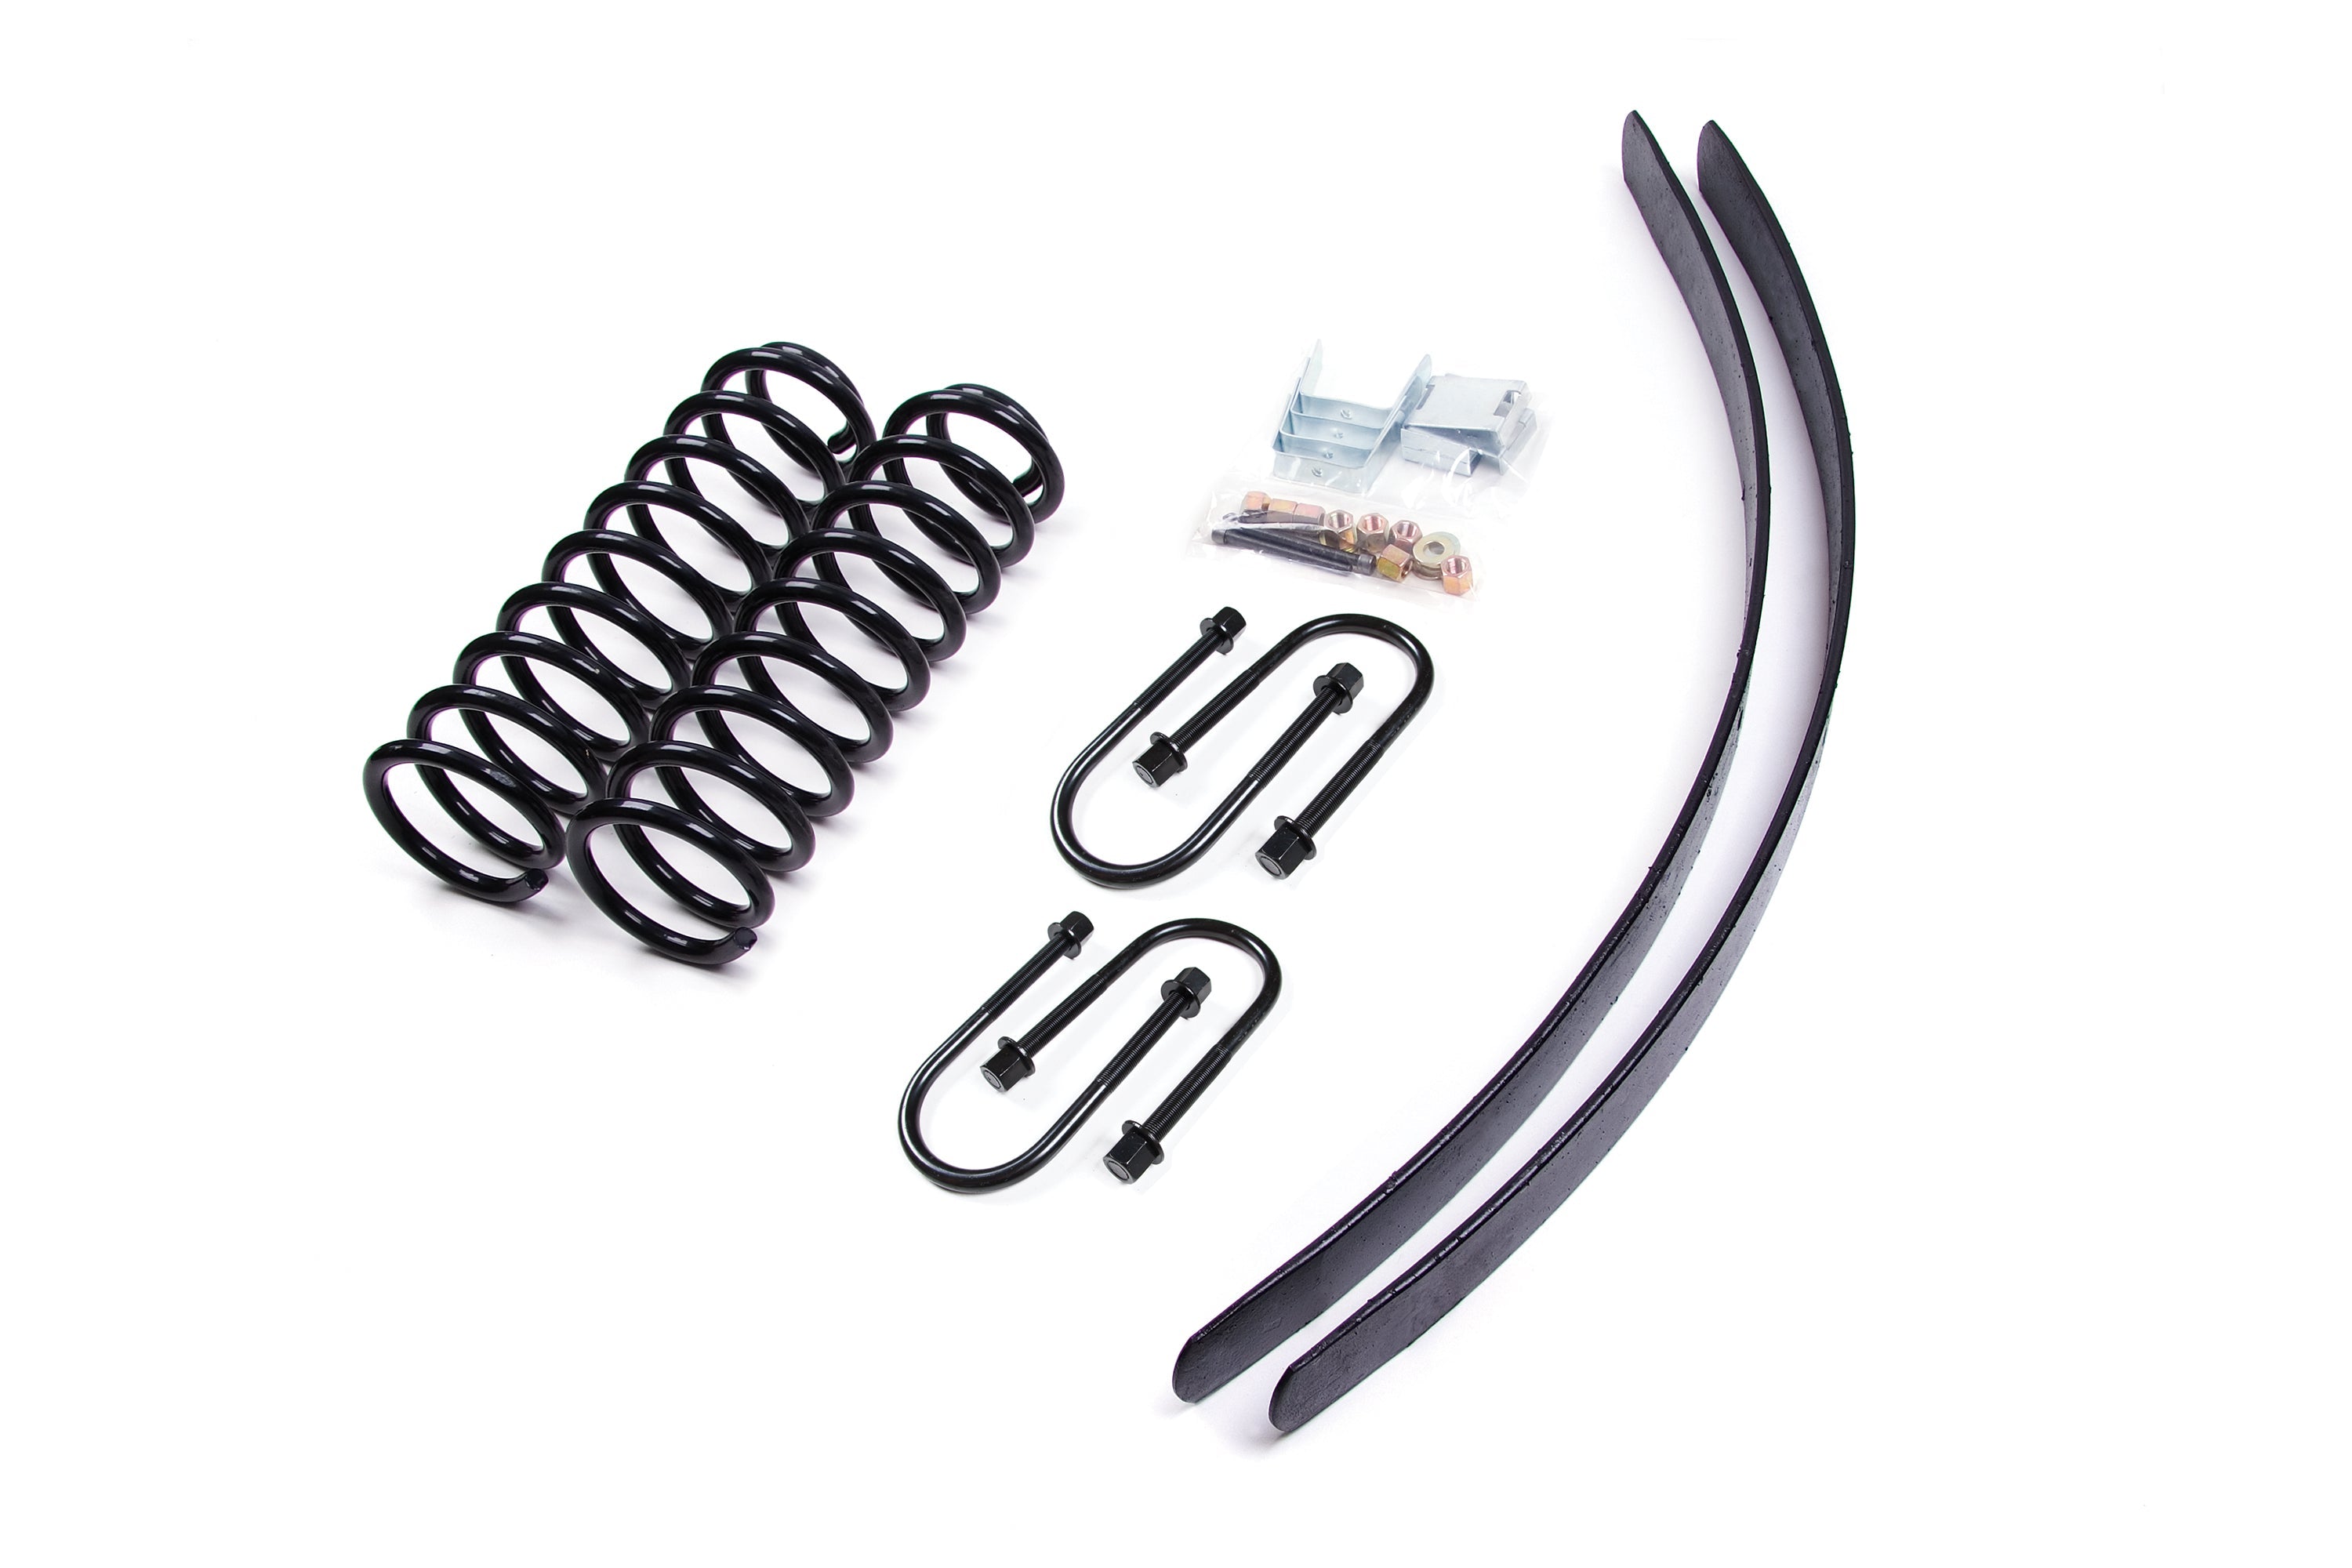 Zone Offroad Products ZONJ7 Zone 3 Coil Spring Lift Kit